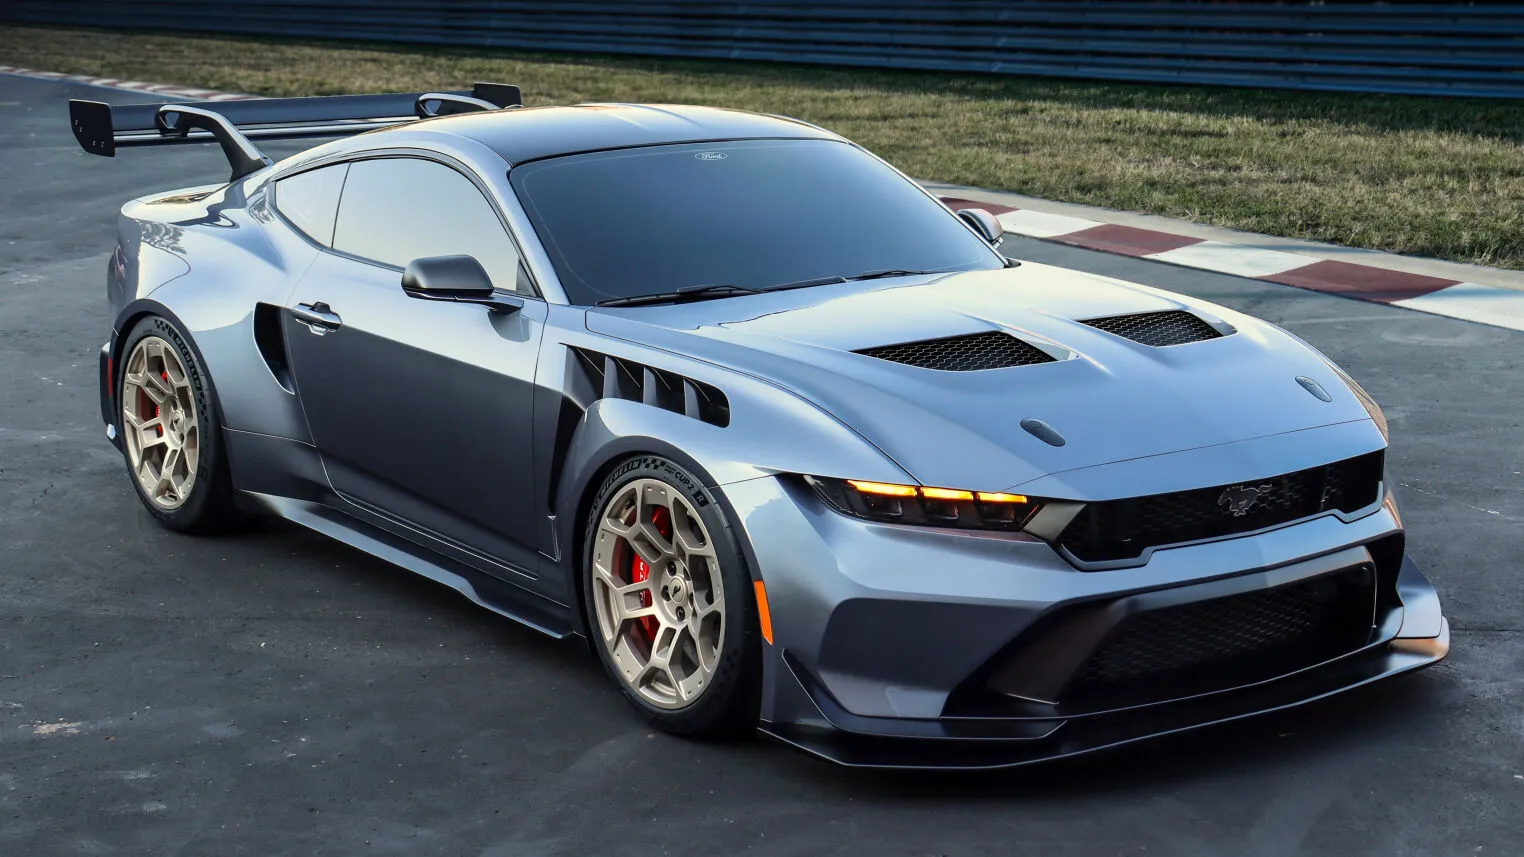 2025 Ford Mustang GTD, electric Acura NSX: Car News Headlines Auto Recent